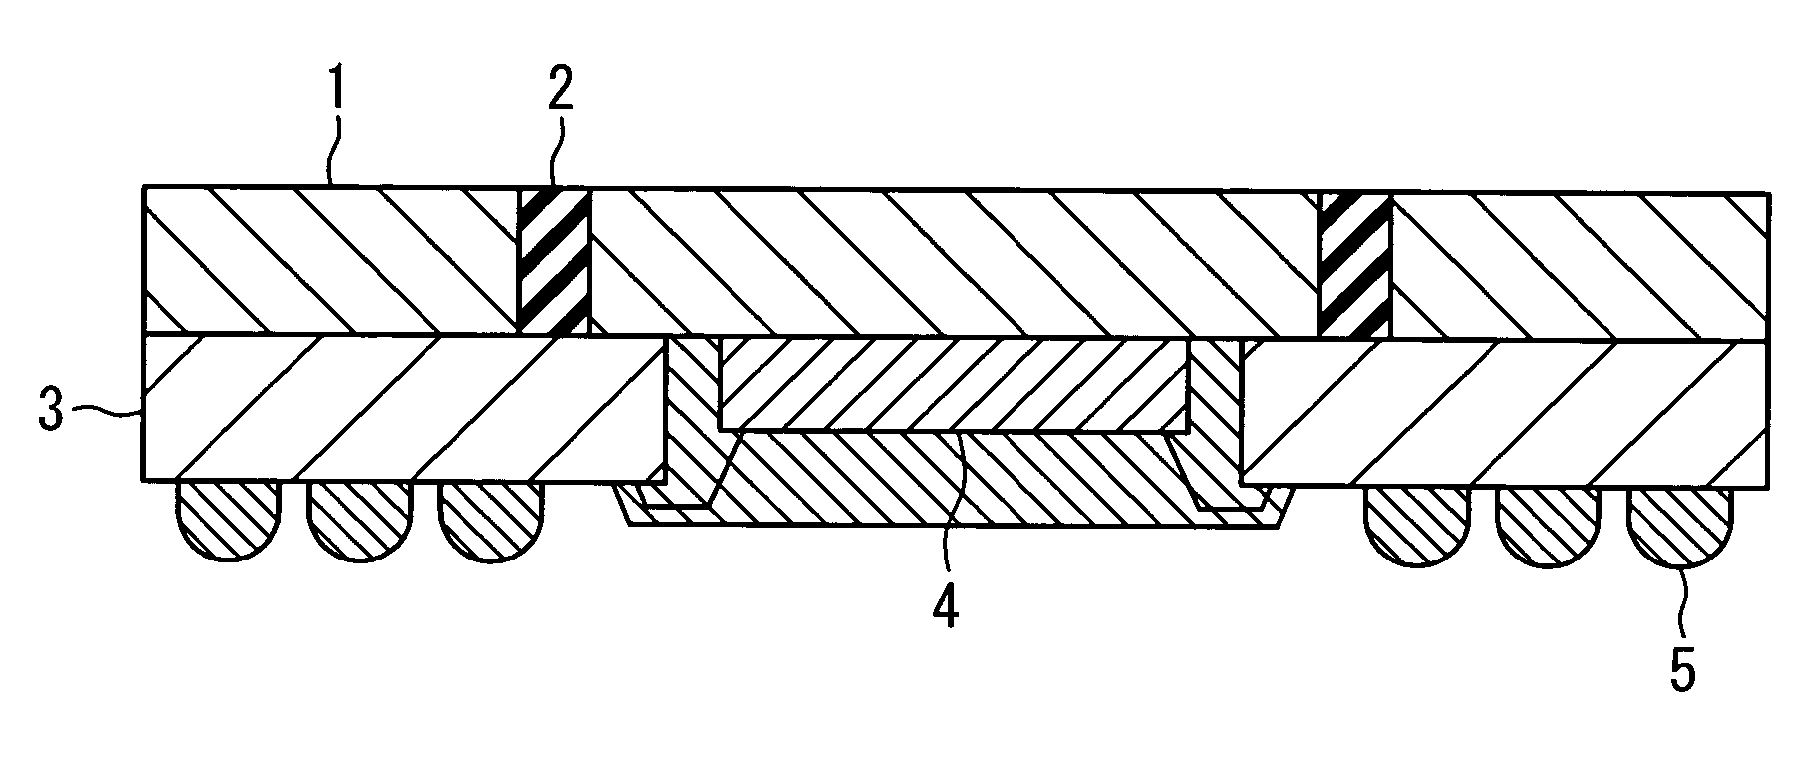 Conductor device and method of manufacturing thereof